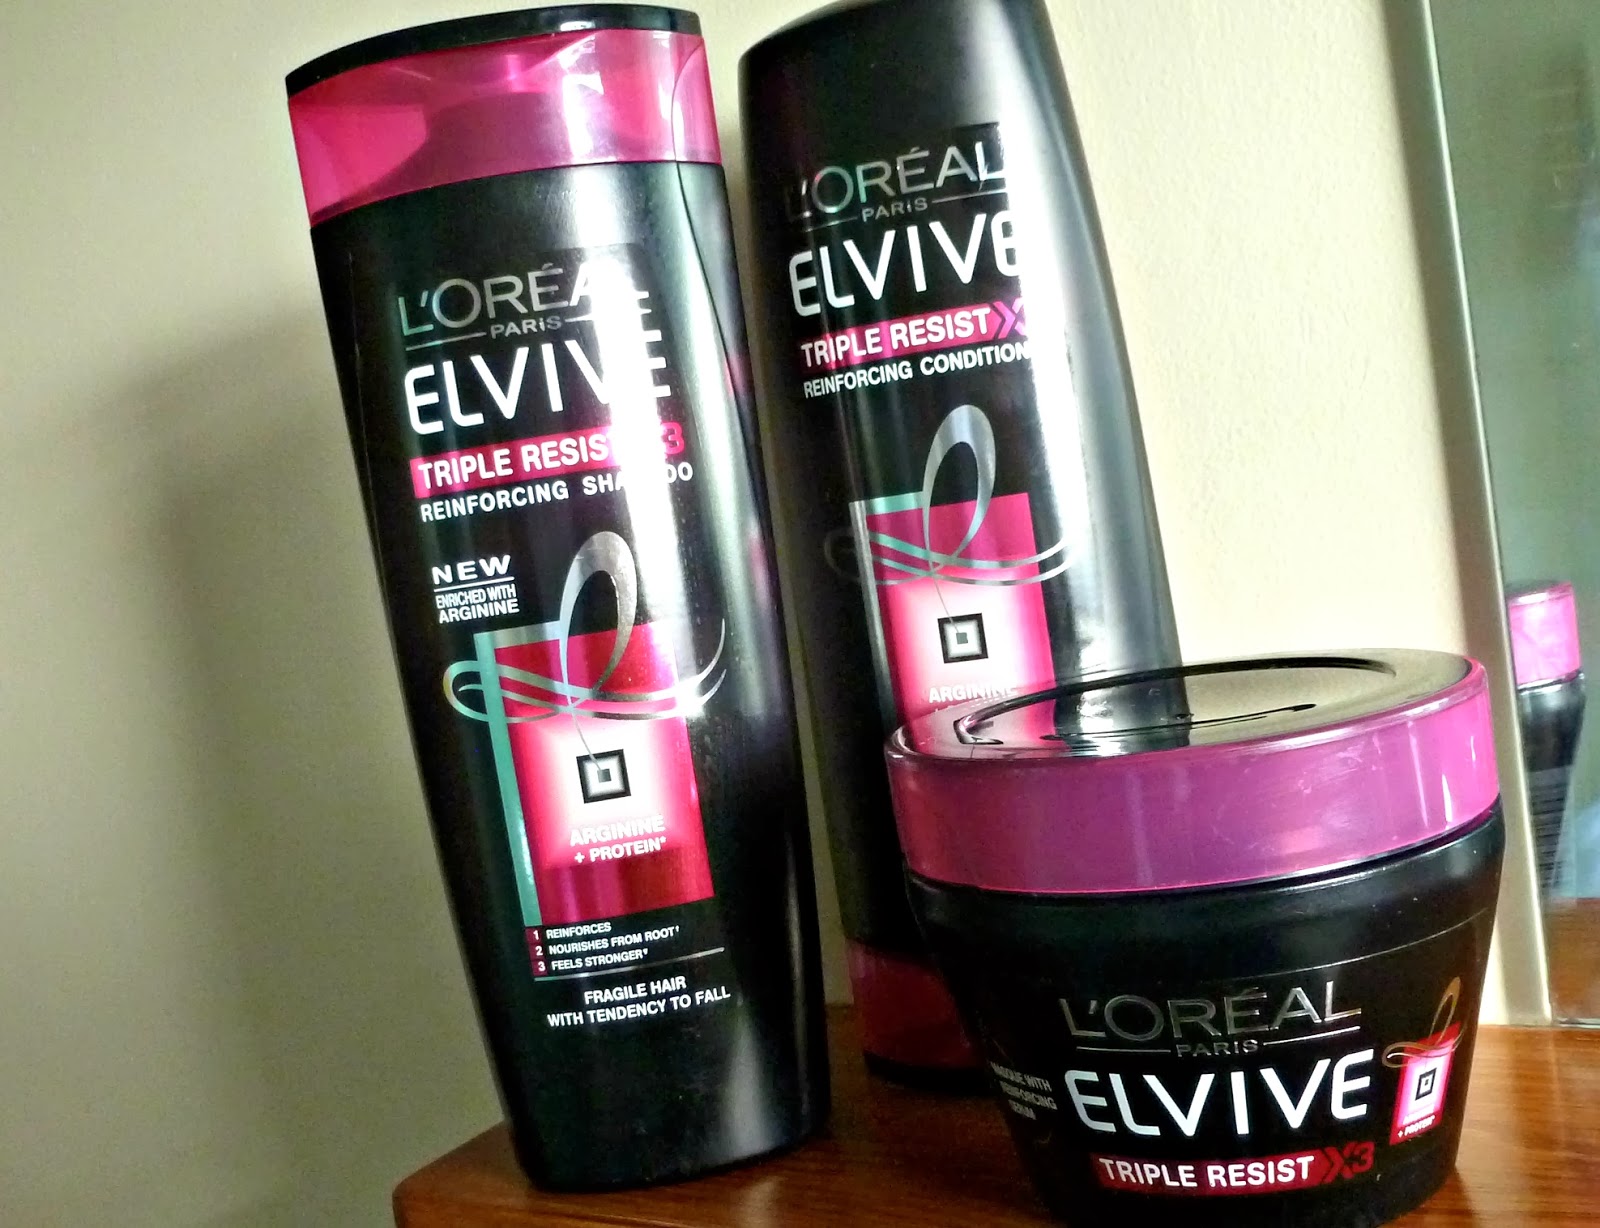 A picture of L'Oreal Elvive Triple Resist